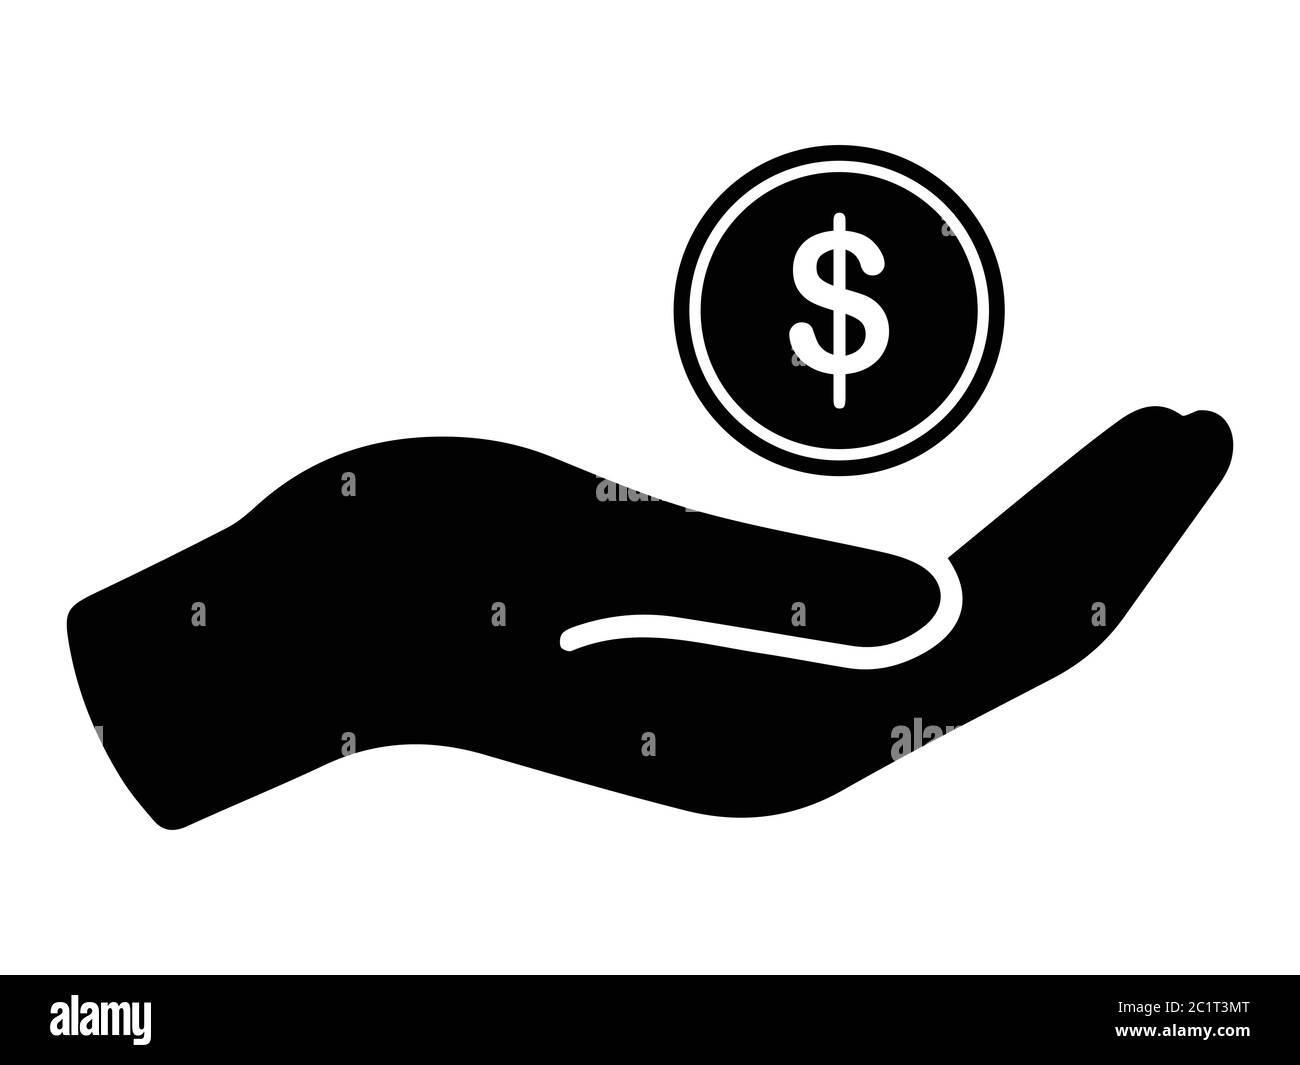 Receive Money Coin Donation Open Palm. Black Illustration Isolated on a White Background. EPS Vector Stock Vector